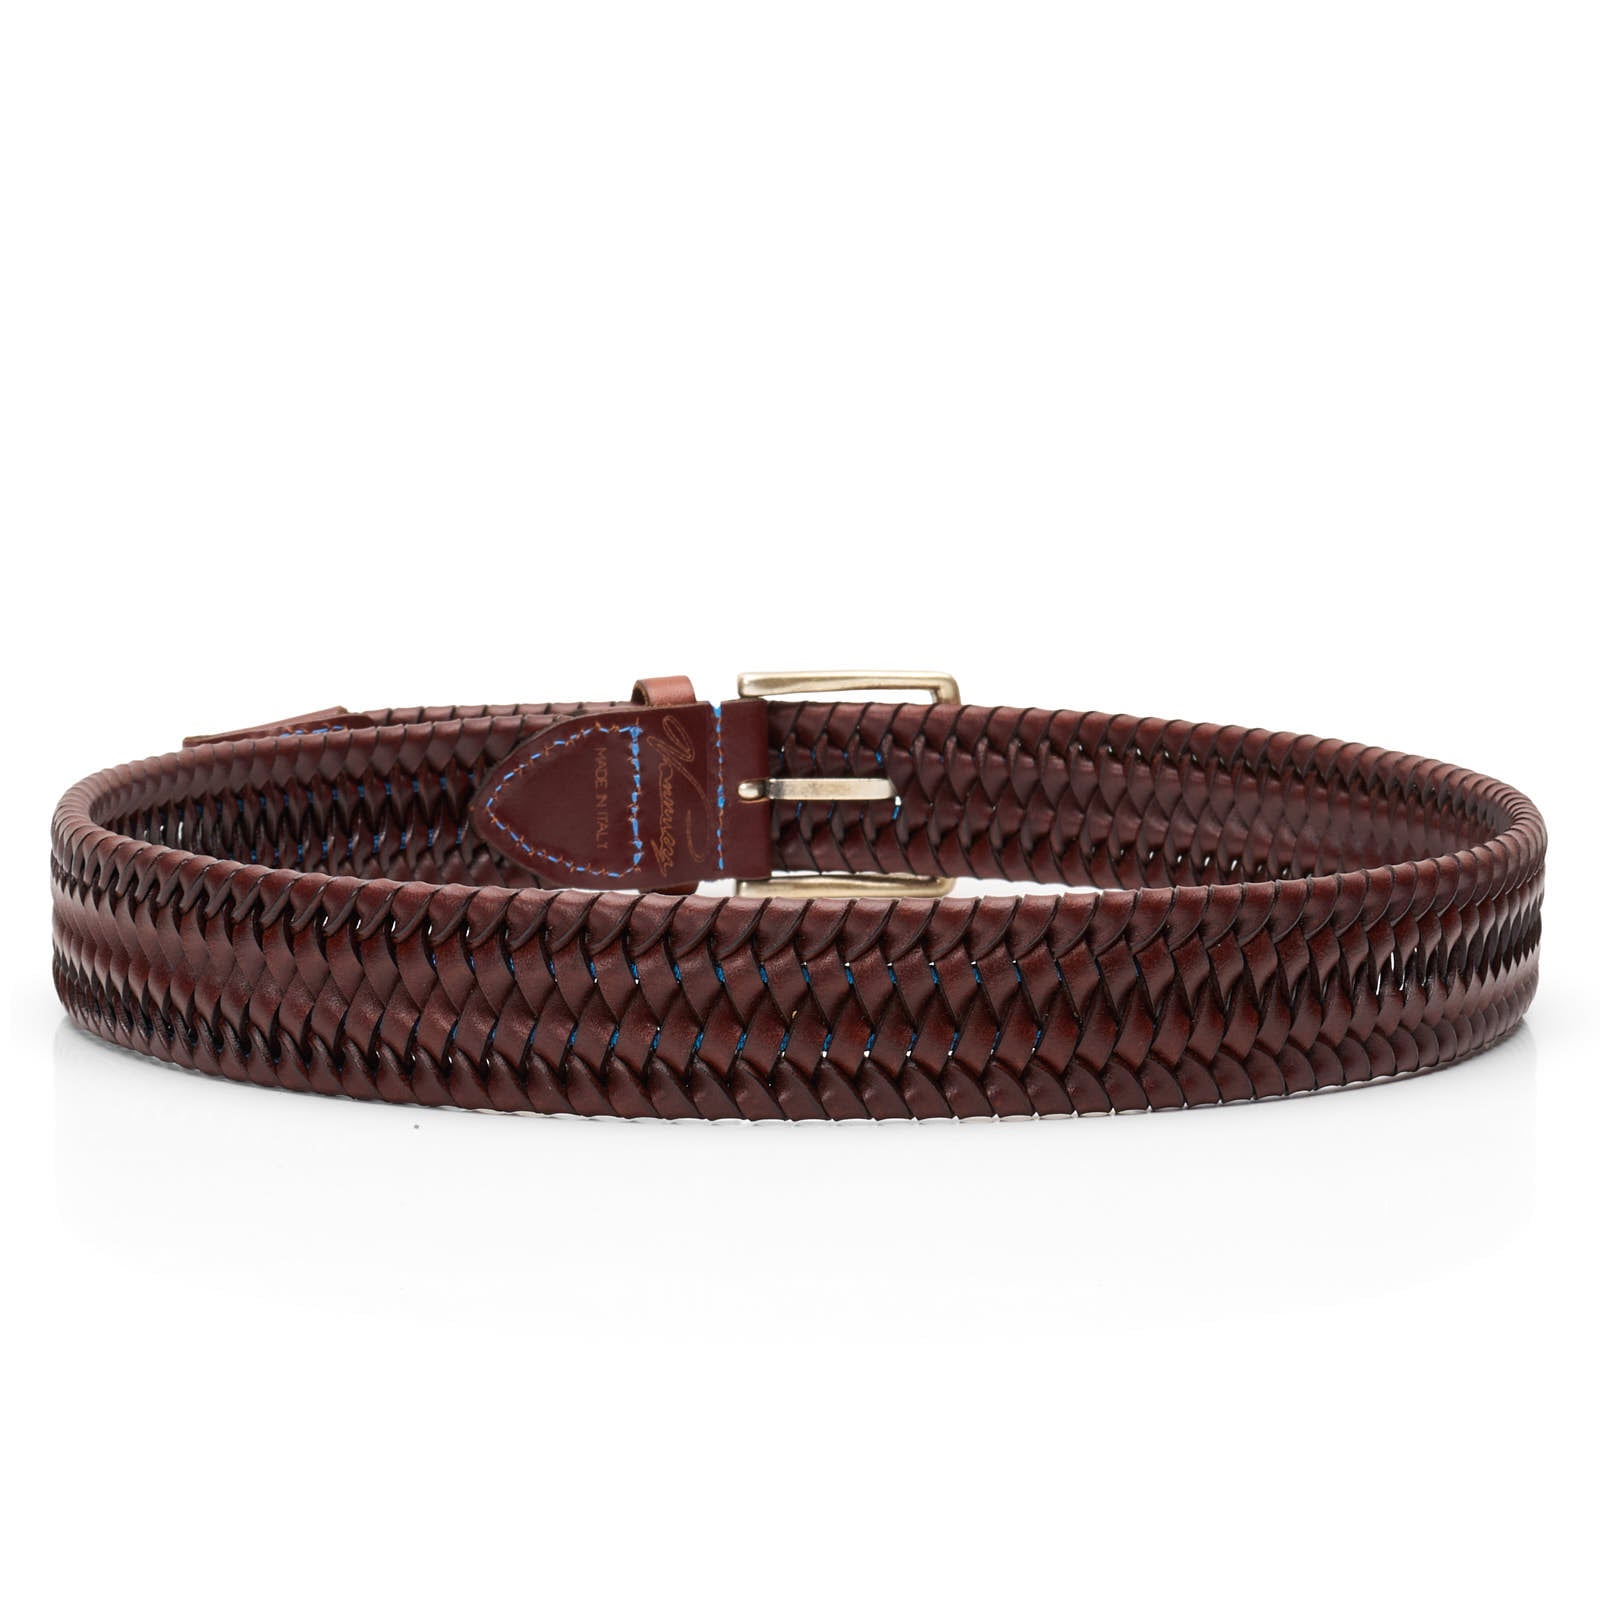 PAOLO VITALE for VANNUCCI Brown Leather Intrecciato Weave Braided Belt 85cm NEW 34